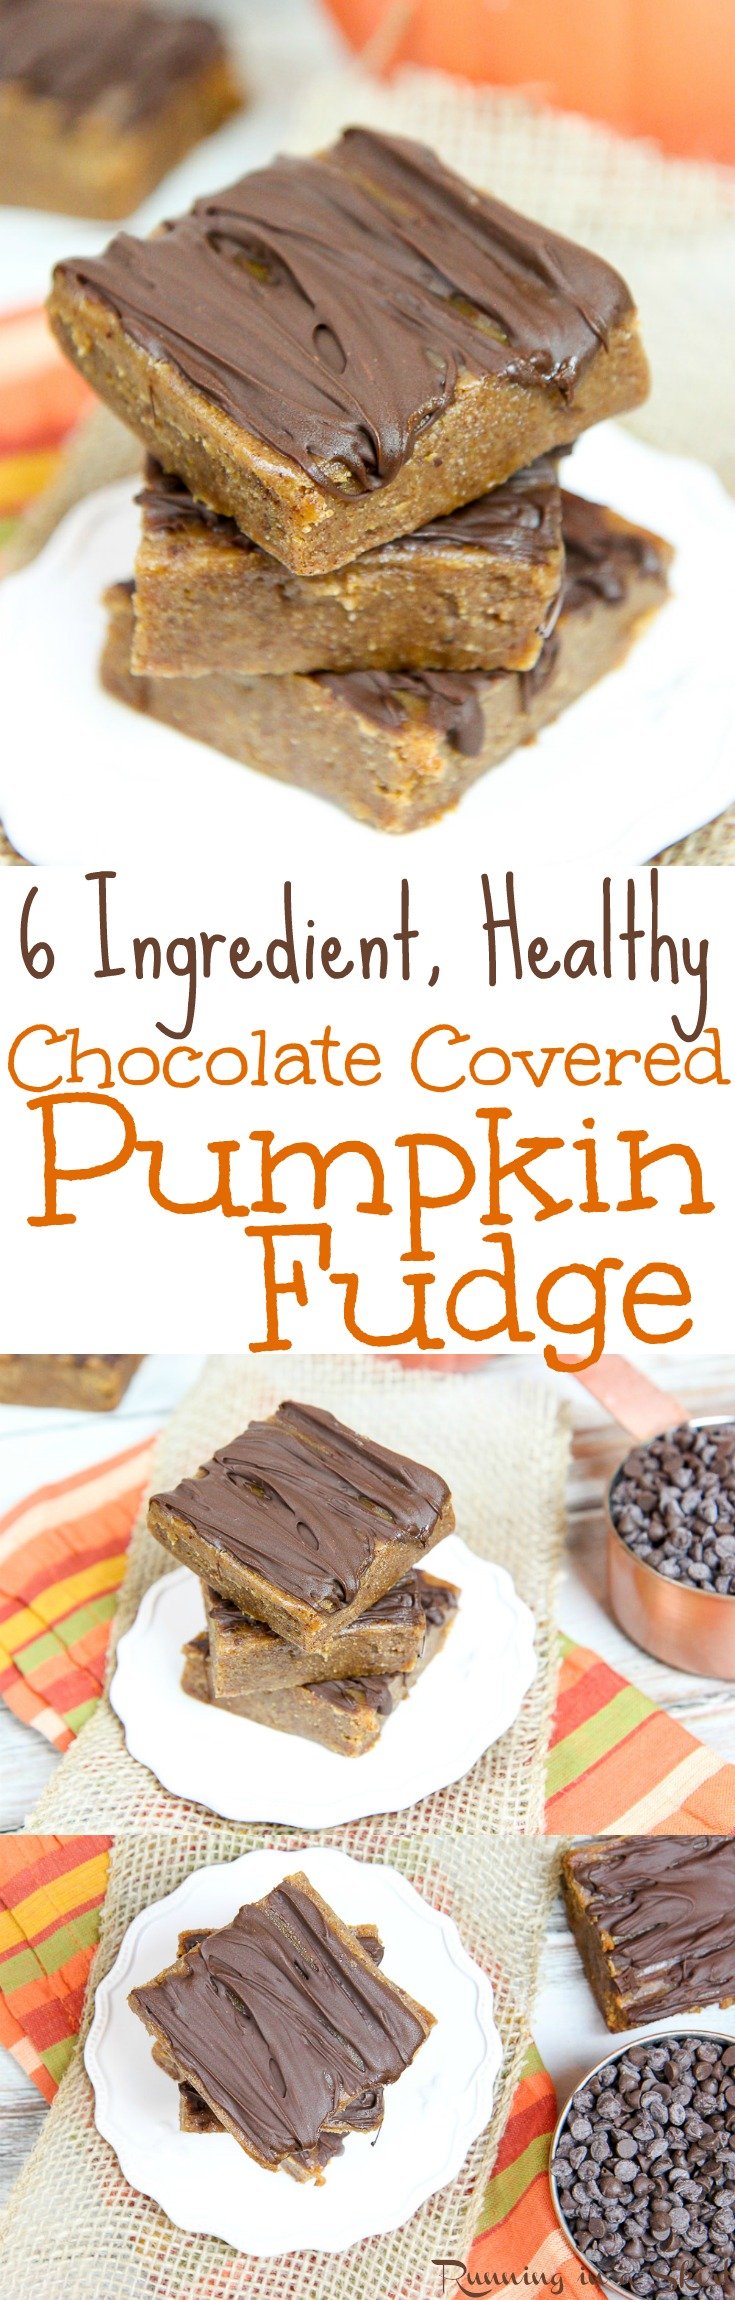 6 Ingredient Chocolate Covered Healthy Pumpkin Fudge recipe. An easy, no cook, no bake, creamy simple fudge. Uses maple syrup, nut butter and coconut oil. Perfect for Thanksgiving or the holidays. Gluten Free, Vegetarian & Vegan / Running in a Skirt via @juliewunder